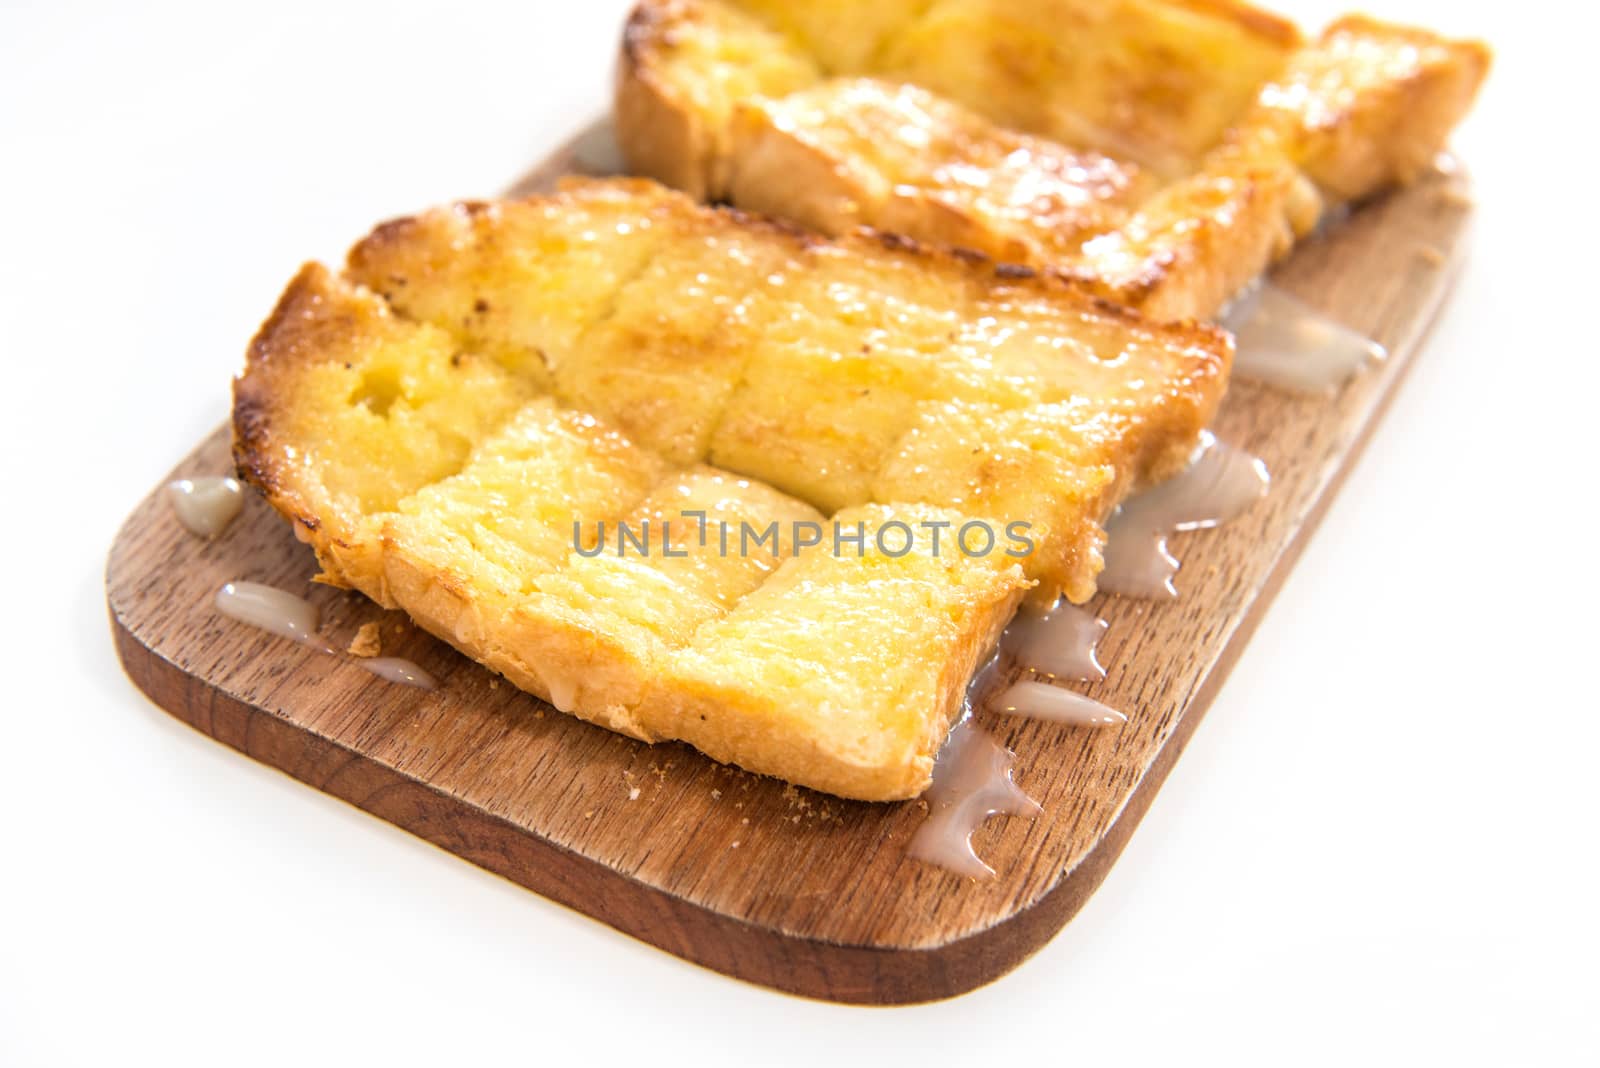 Bread toast and condensed milk on wooden plate over white background